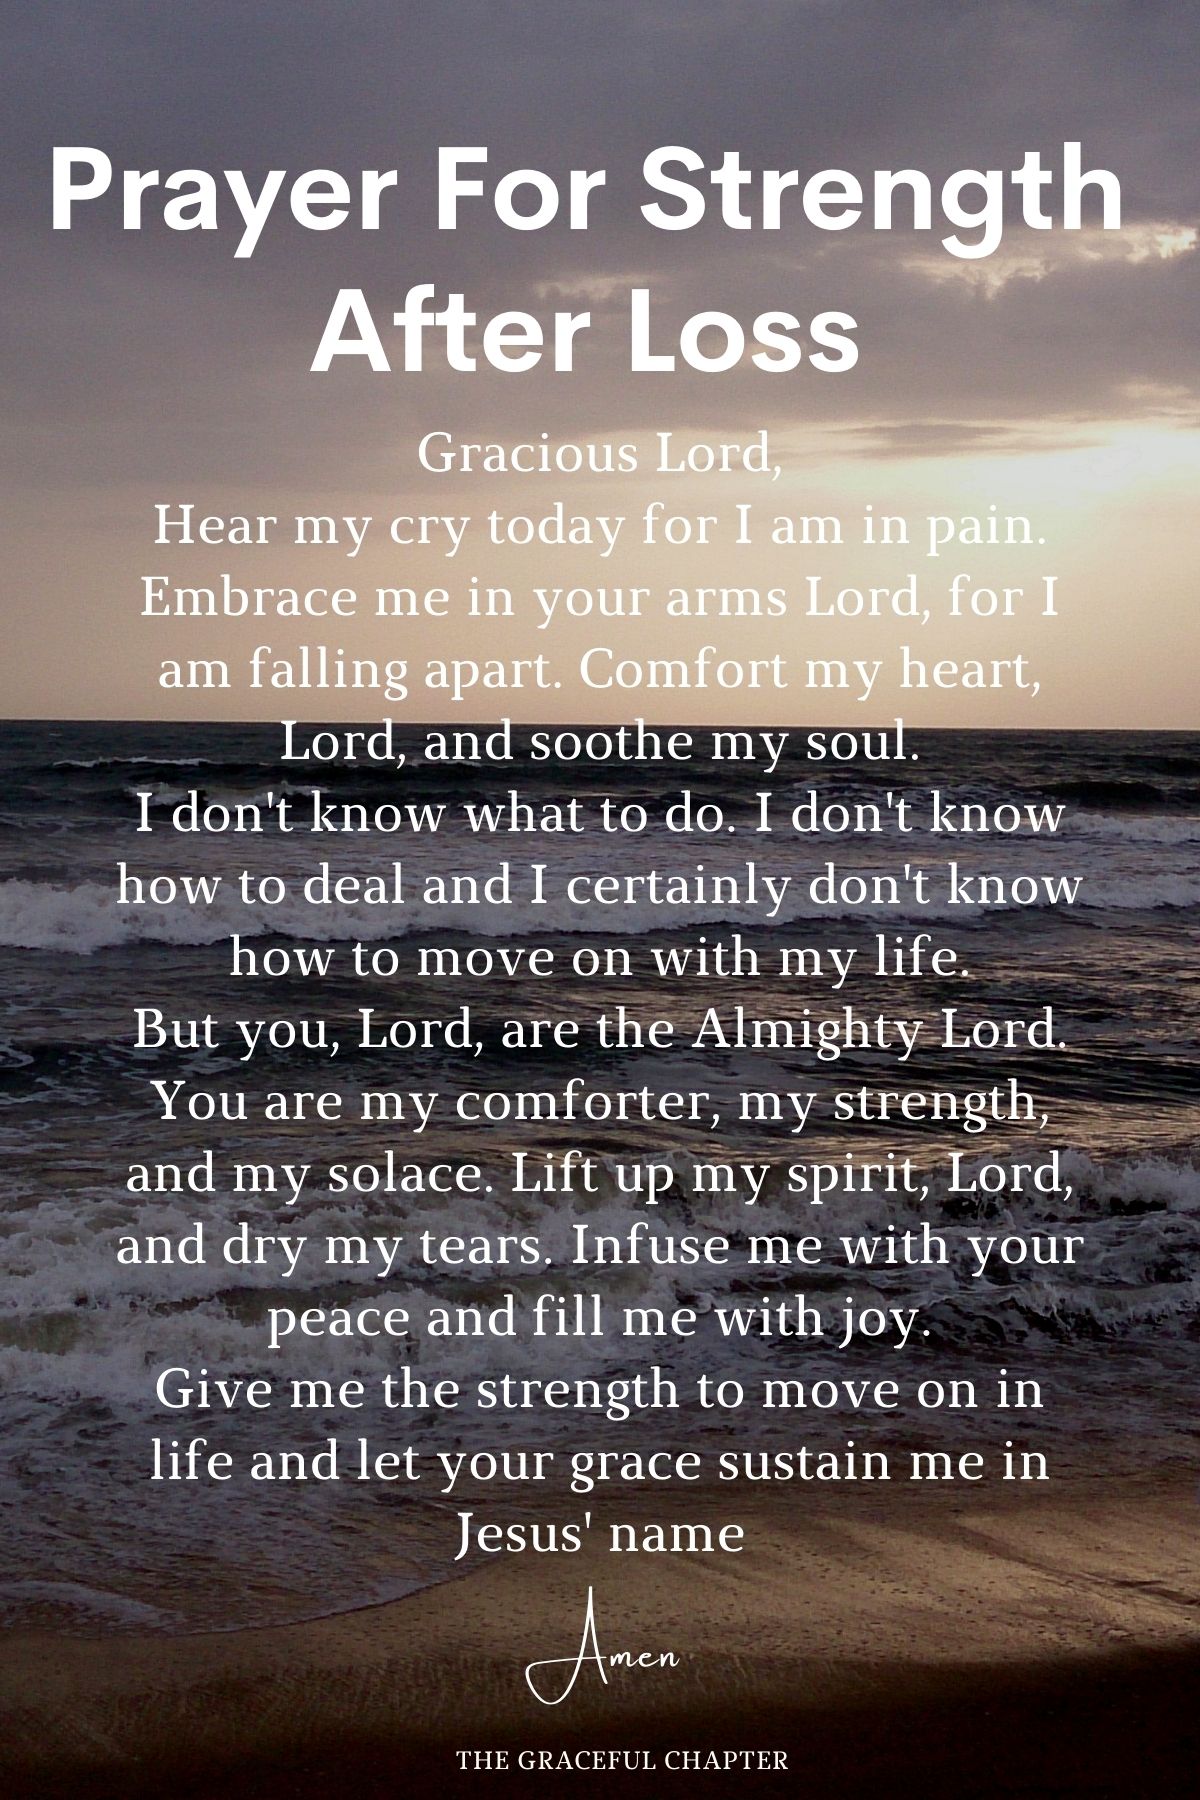 Prayer for strength after loss